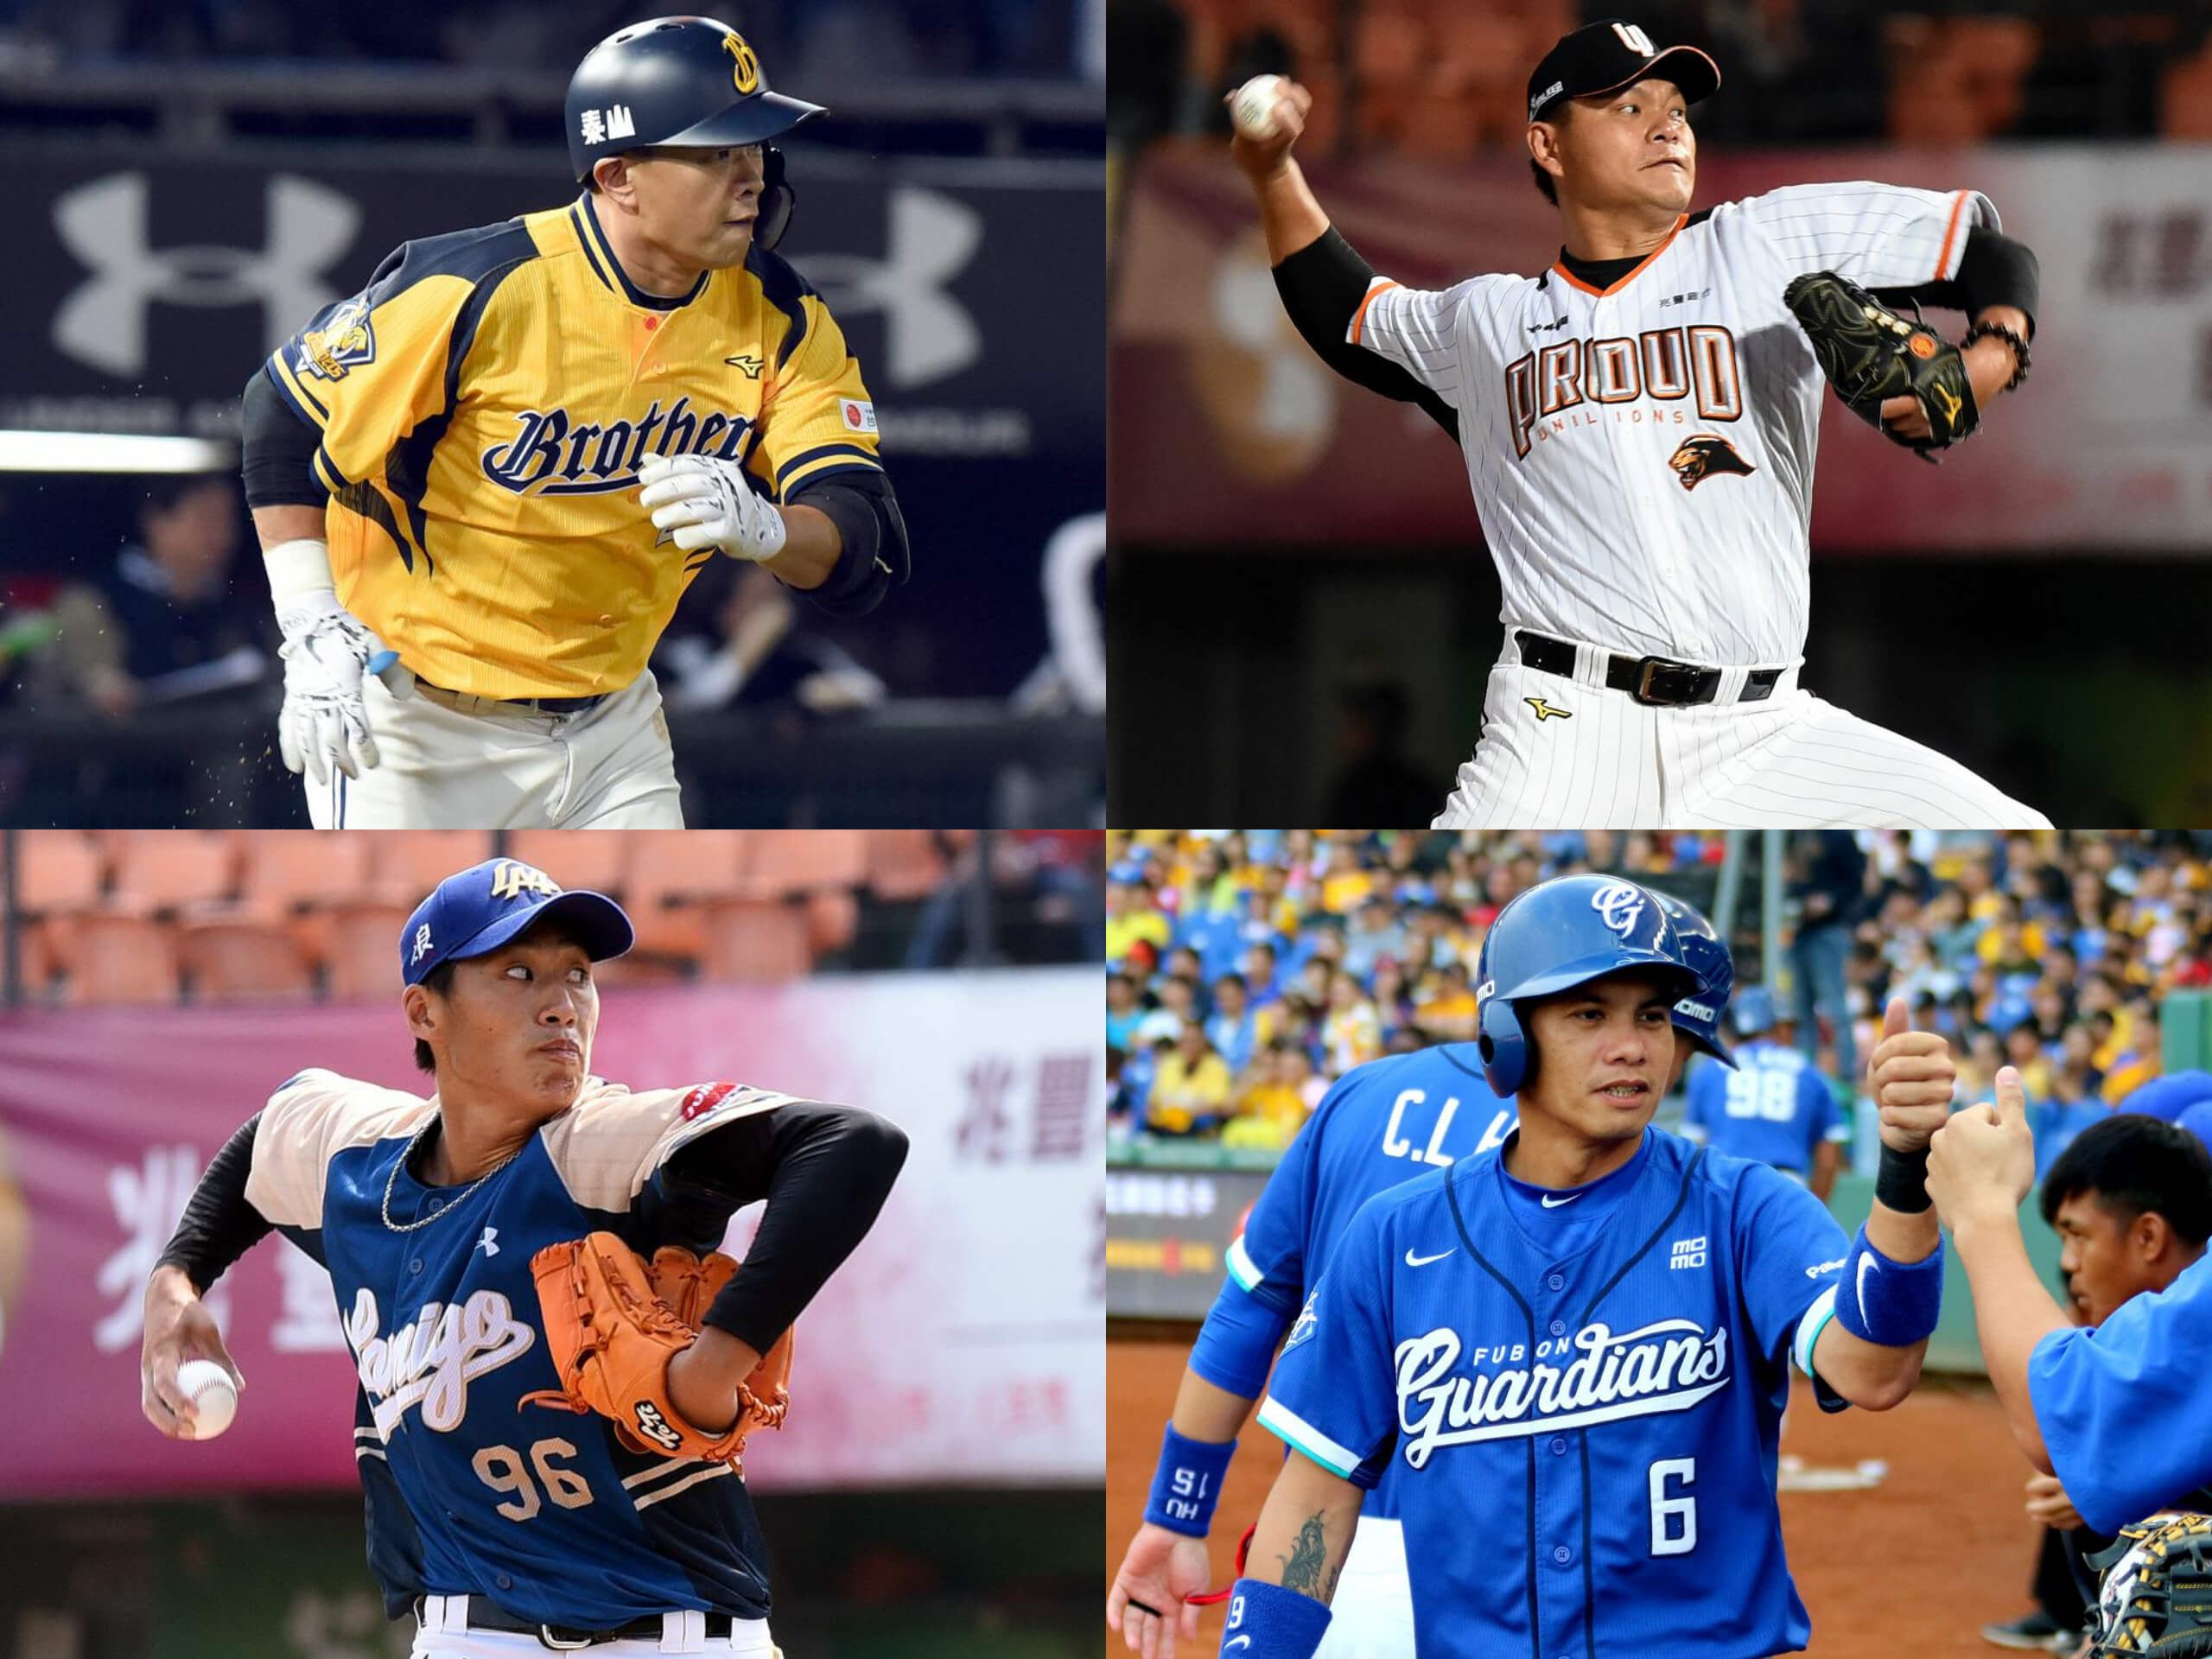 2019 Chinatrust Brothers' Uniforms Guide - CPBL STATS